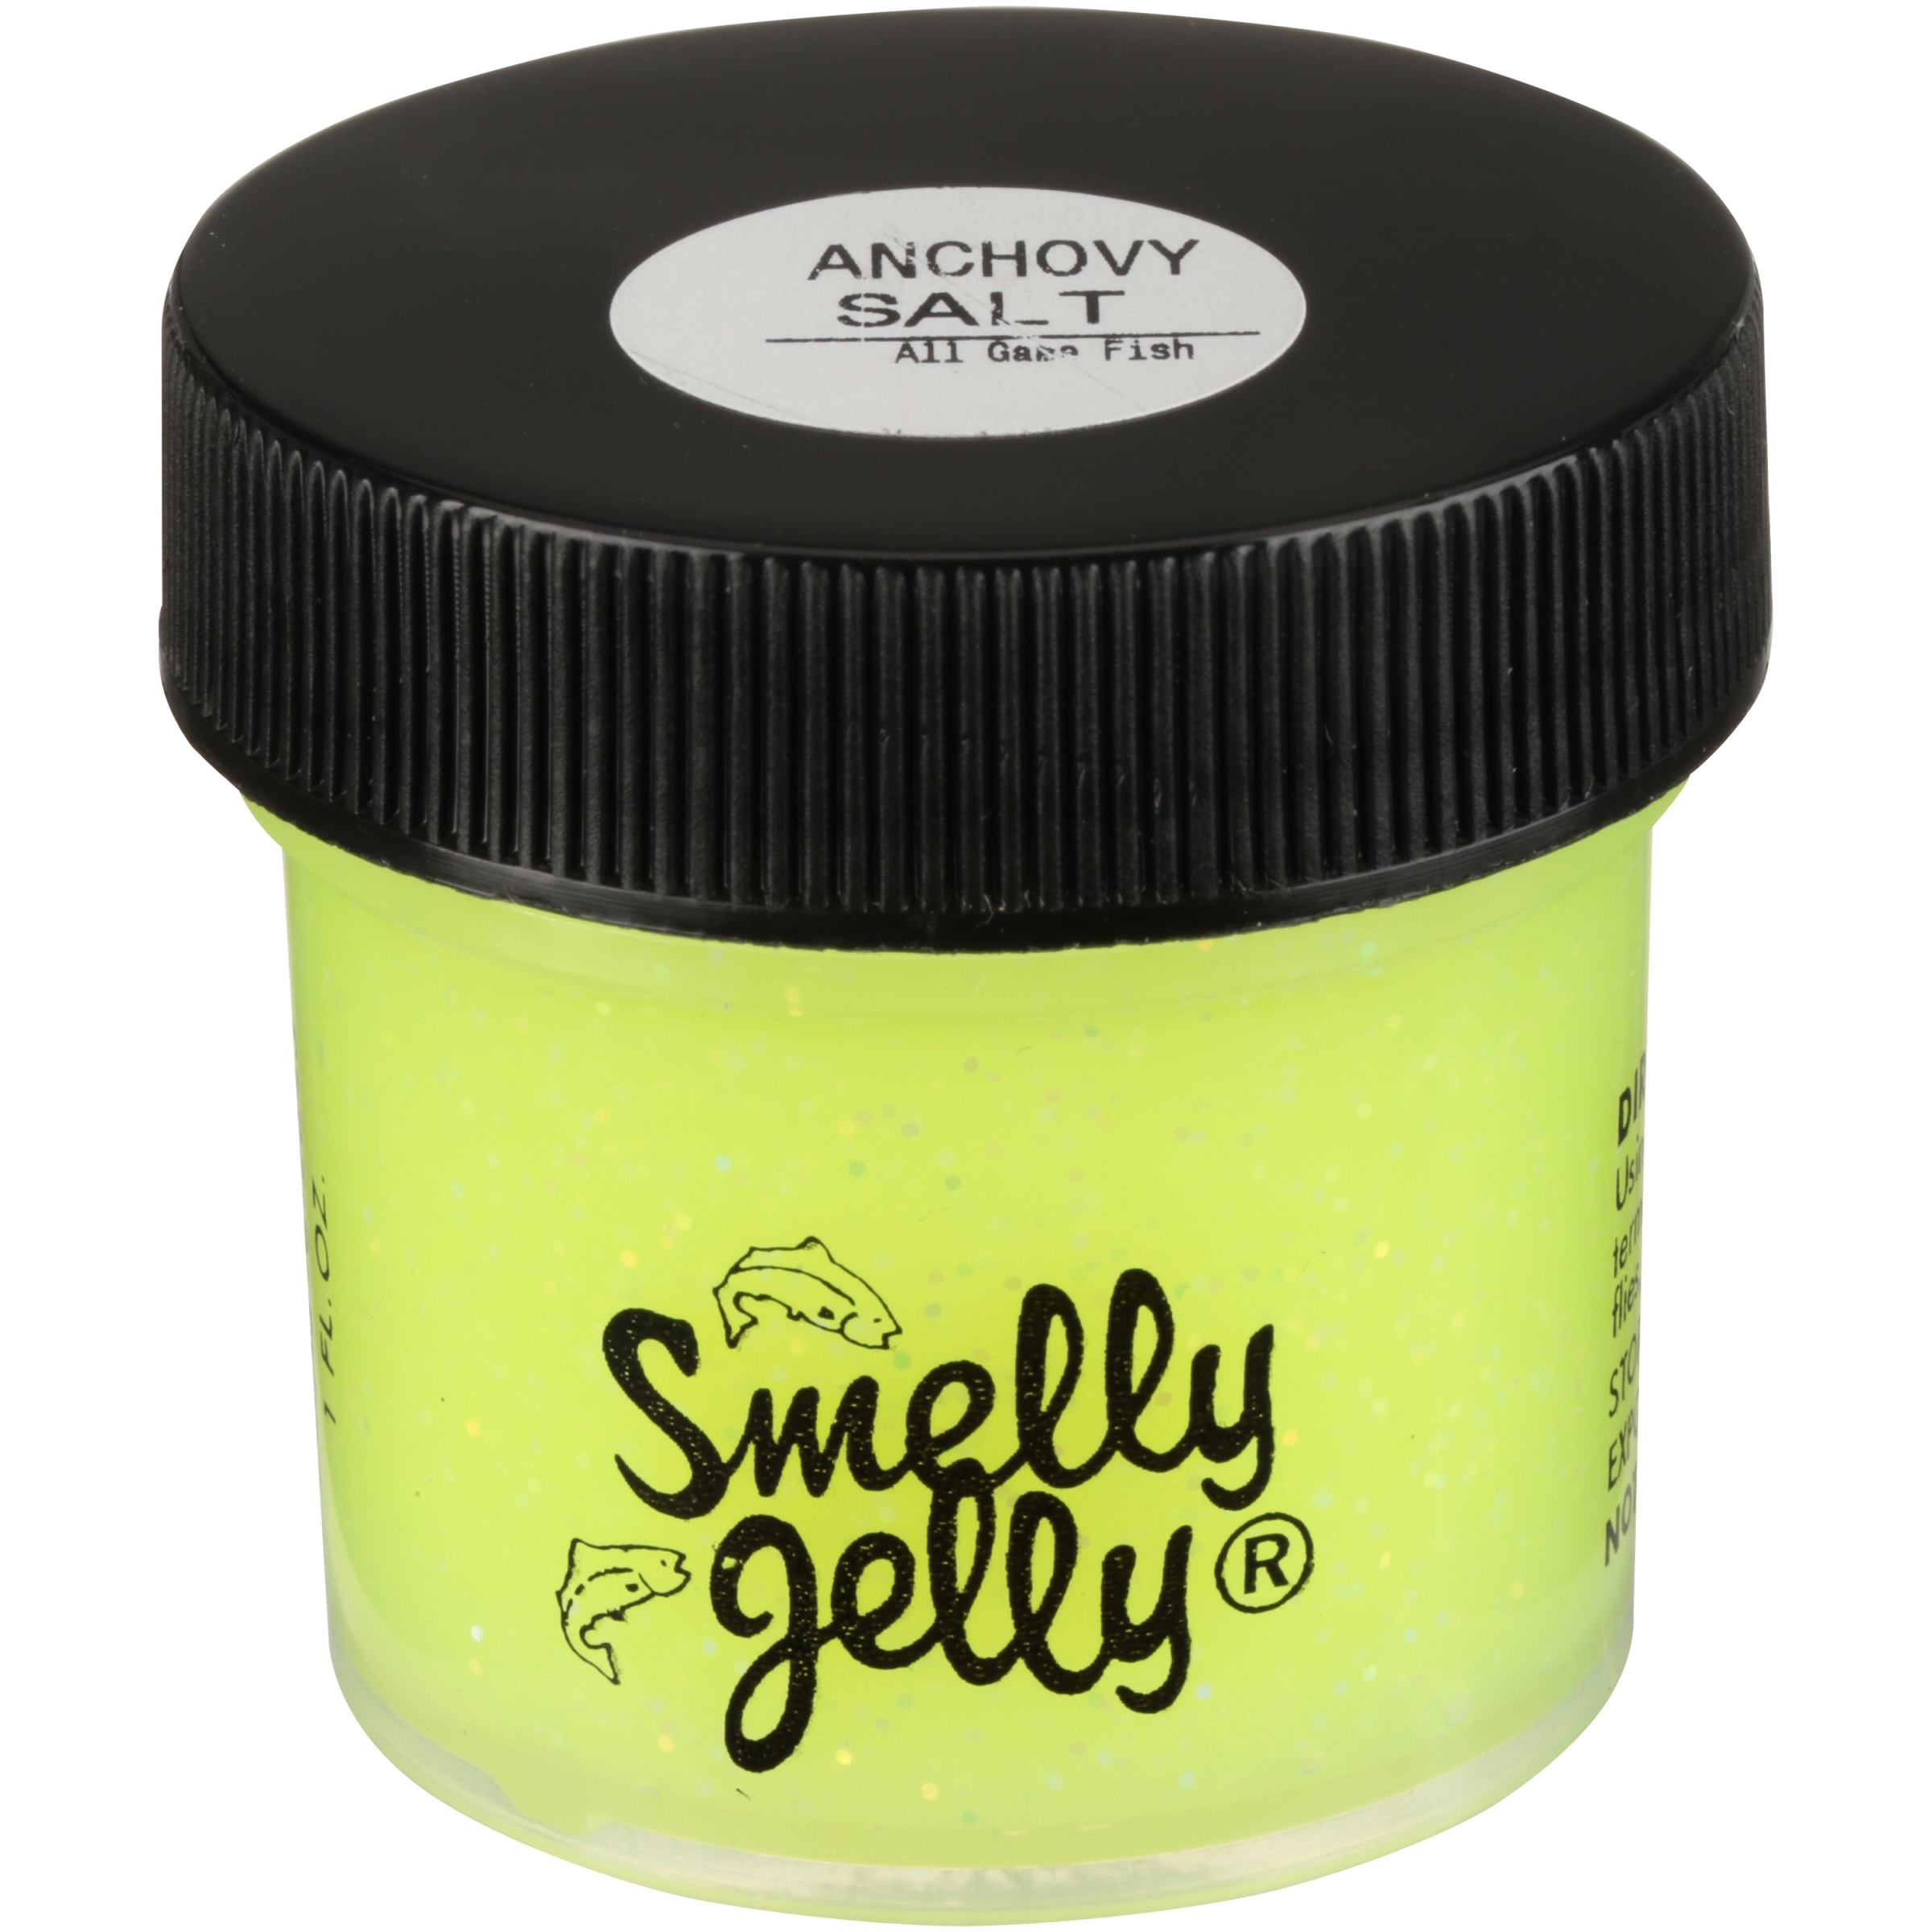 Smelly Jelly All Game Fish Attractant, Anchovy Salt, Glitter, 1 Fluid Ounce - image 2 of 5